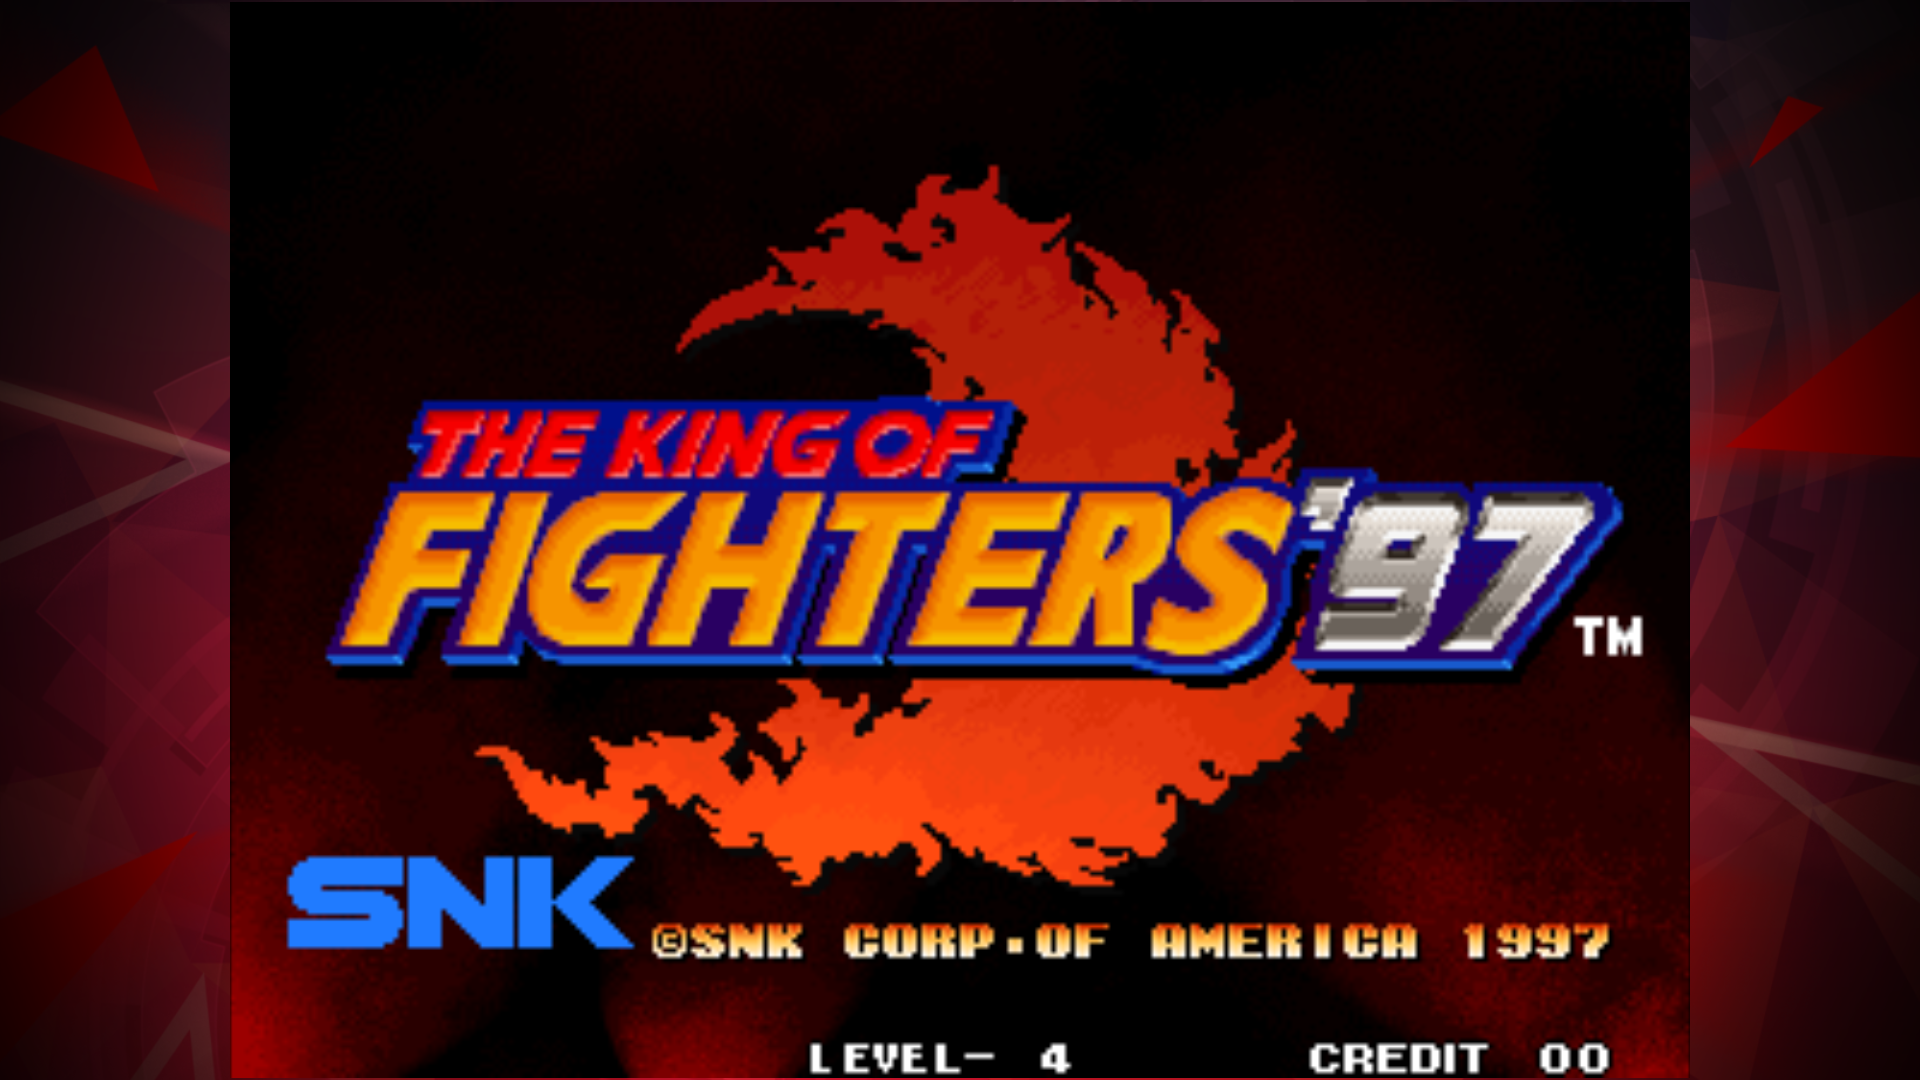 Free Arcade3 KOF 97 APK Download For Android